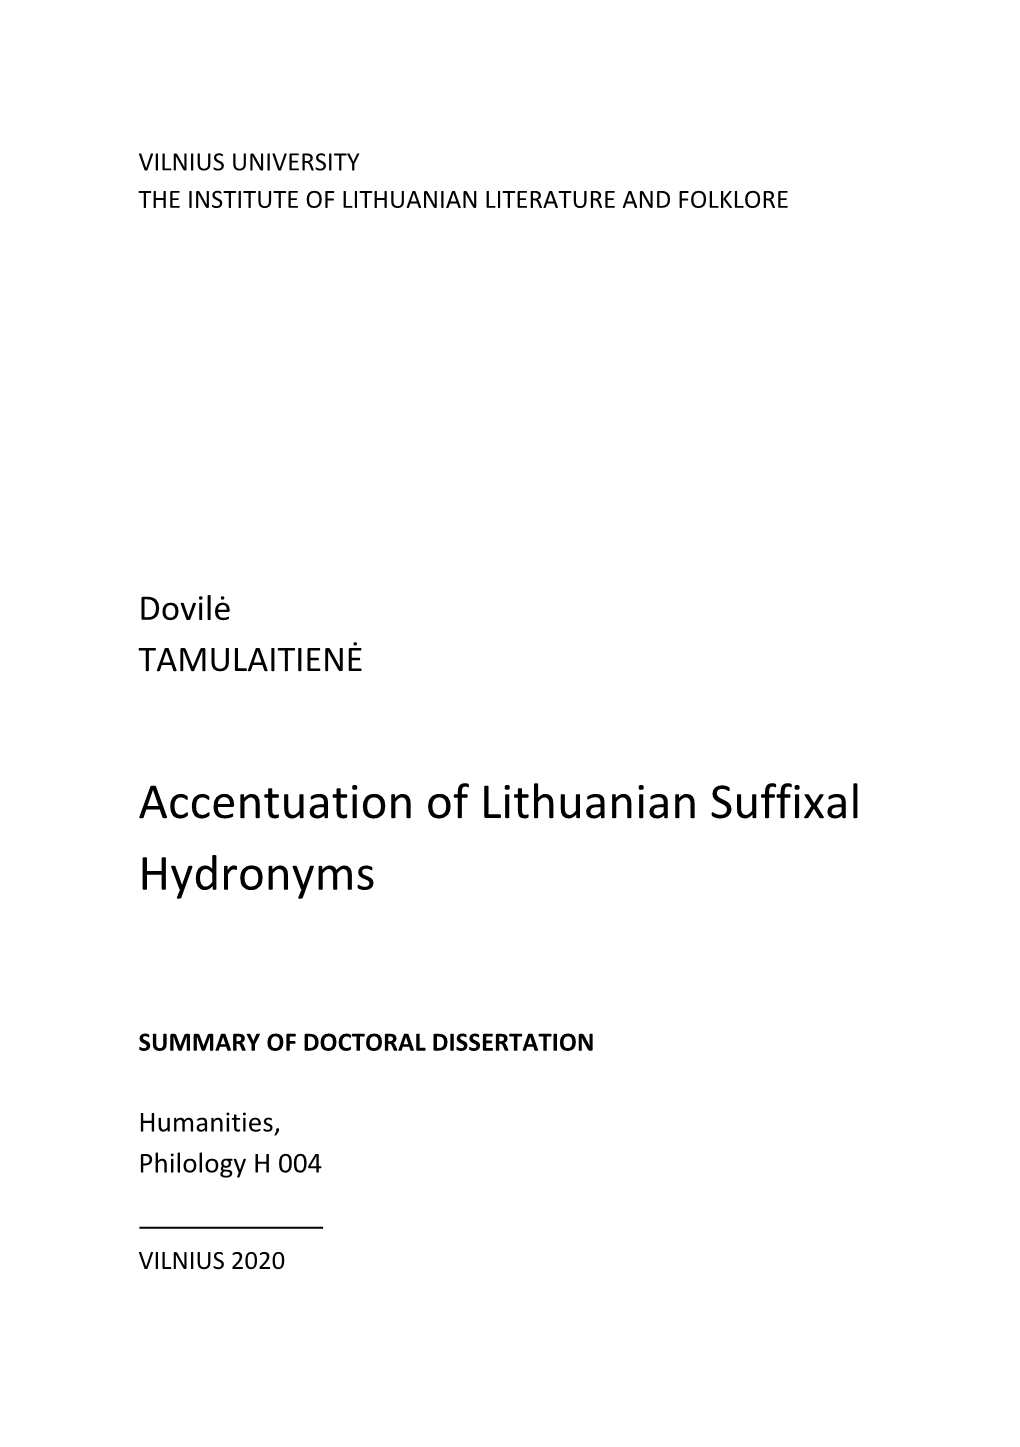 Accentuation of Lithuanian Suffixal Hydronyms